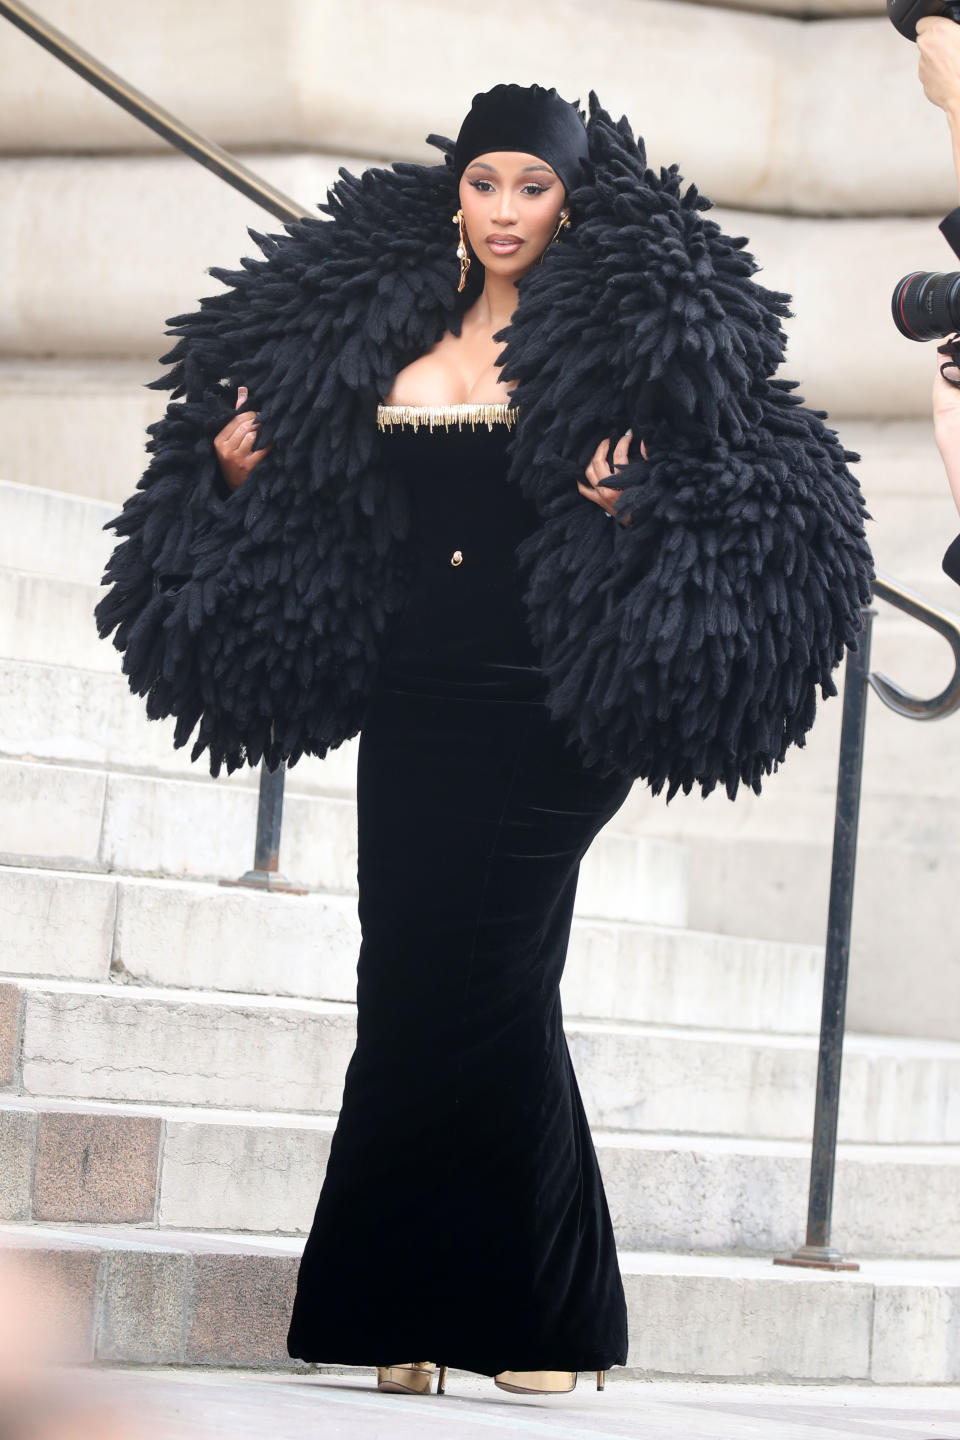 PARIS, UNITED KINGDOM – JULY 3: Cardi b is seen arriving at the Schiaparelli fashion show on July 3, 2023 in Paris, United Kingdom. (Photo by MEGA/GC Images)